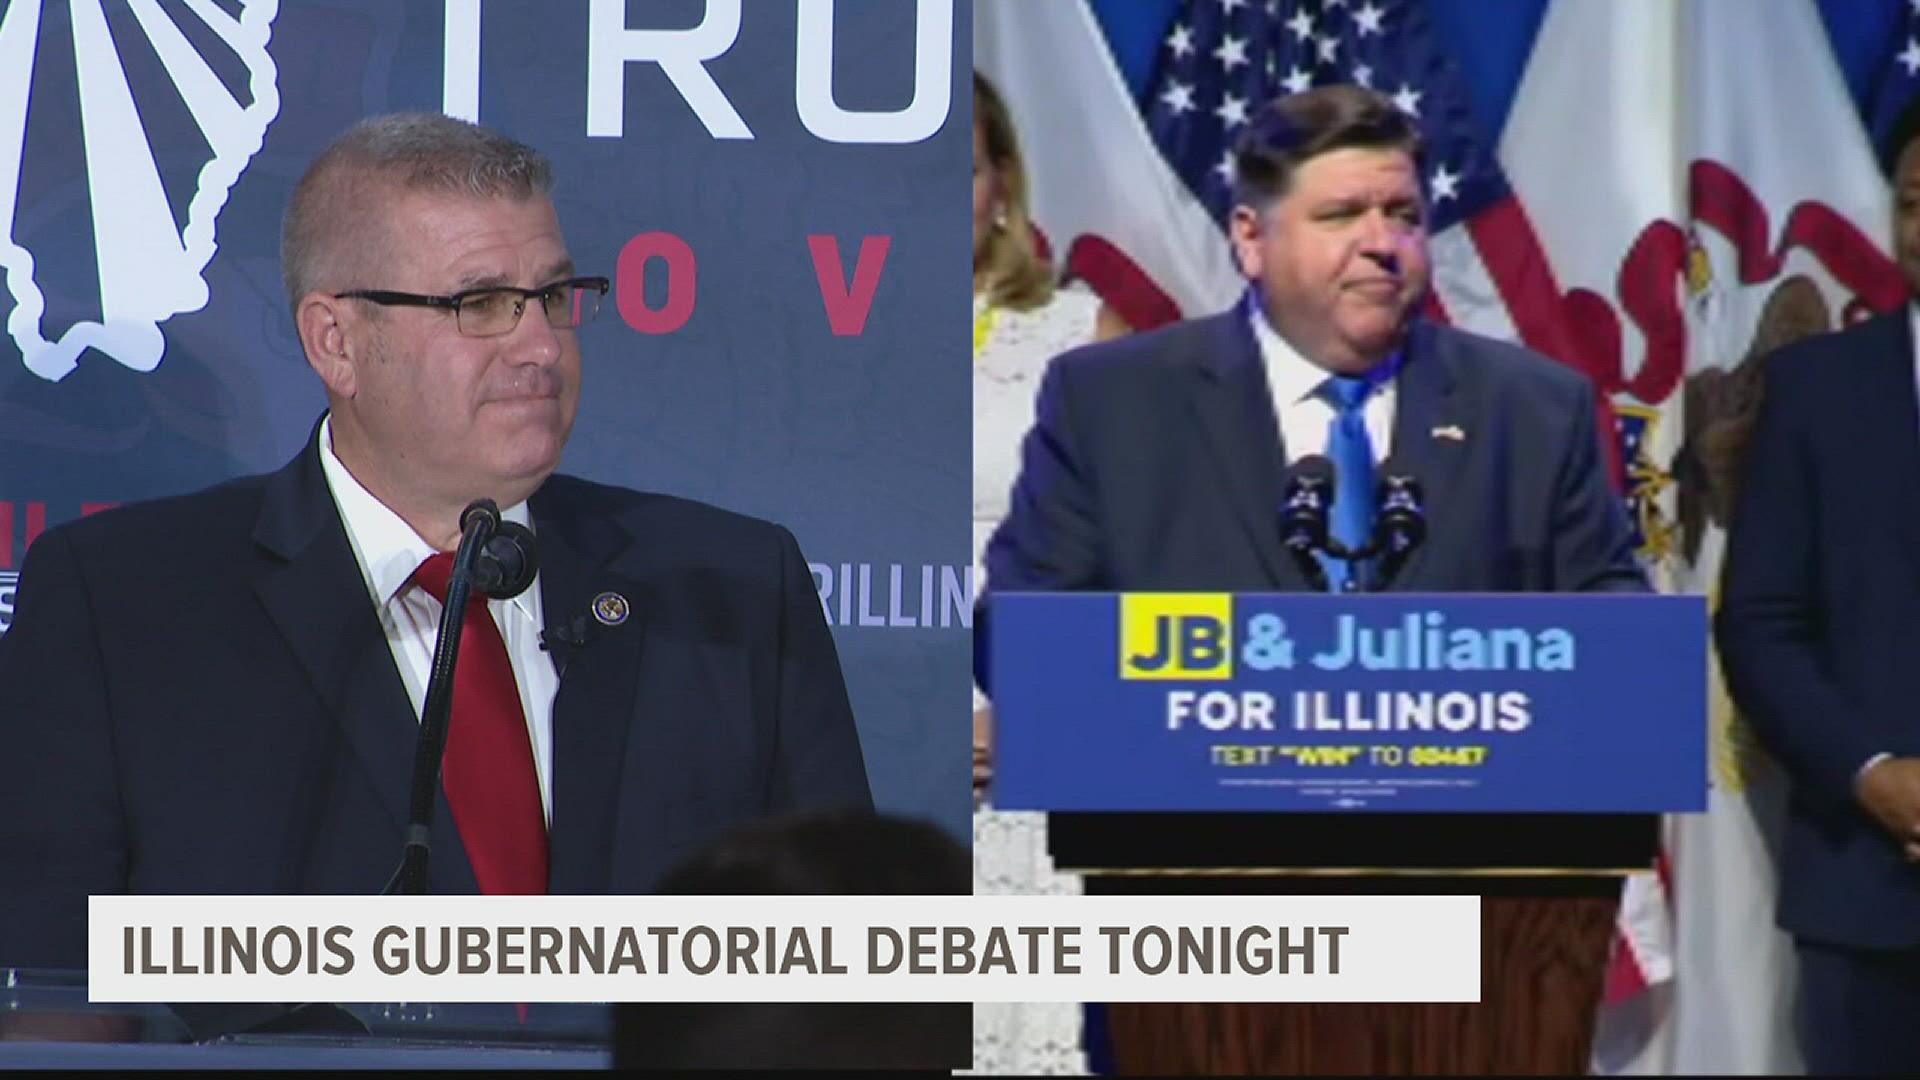 Another debate will be held in the two weeks as the gubernatorial candidates prepare for the midterm elections.